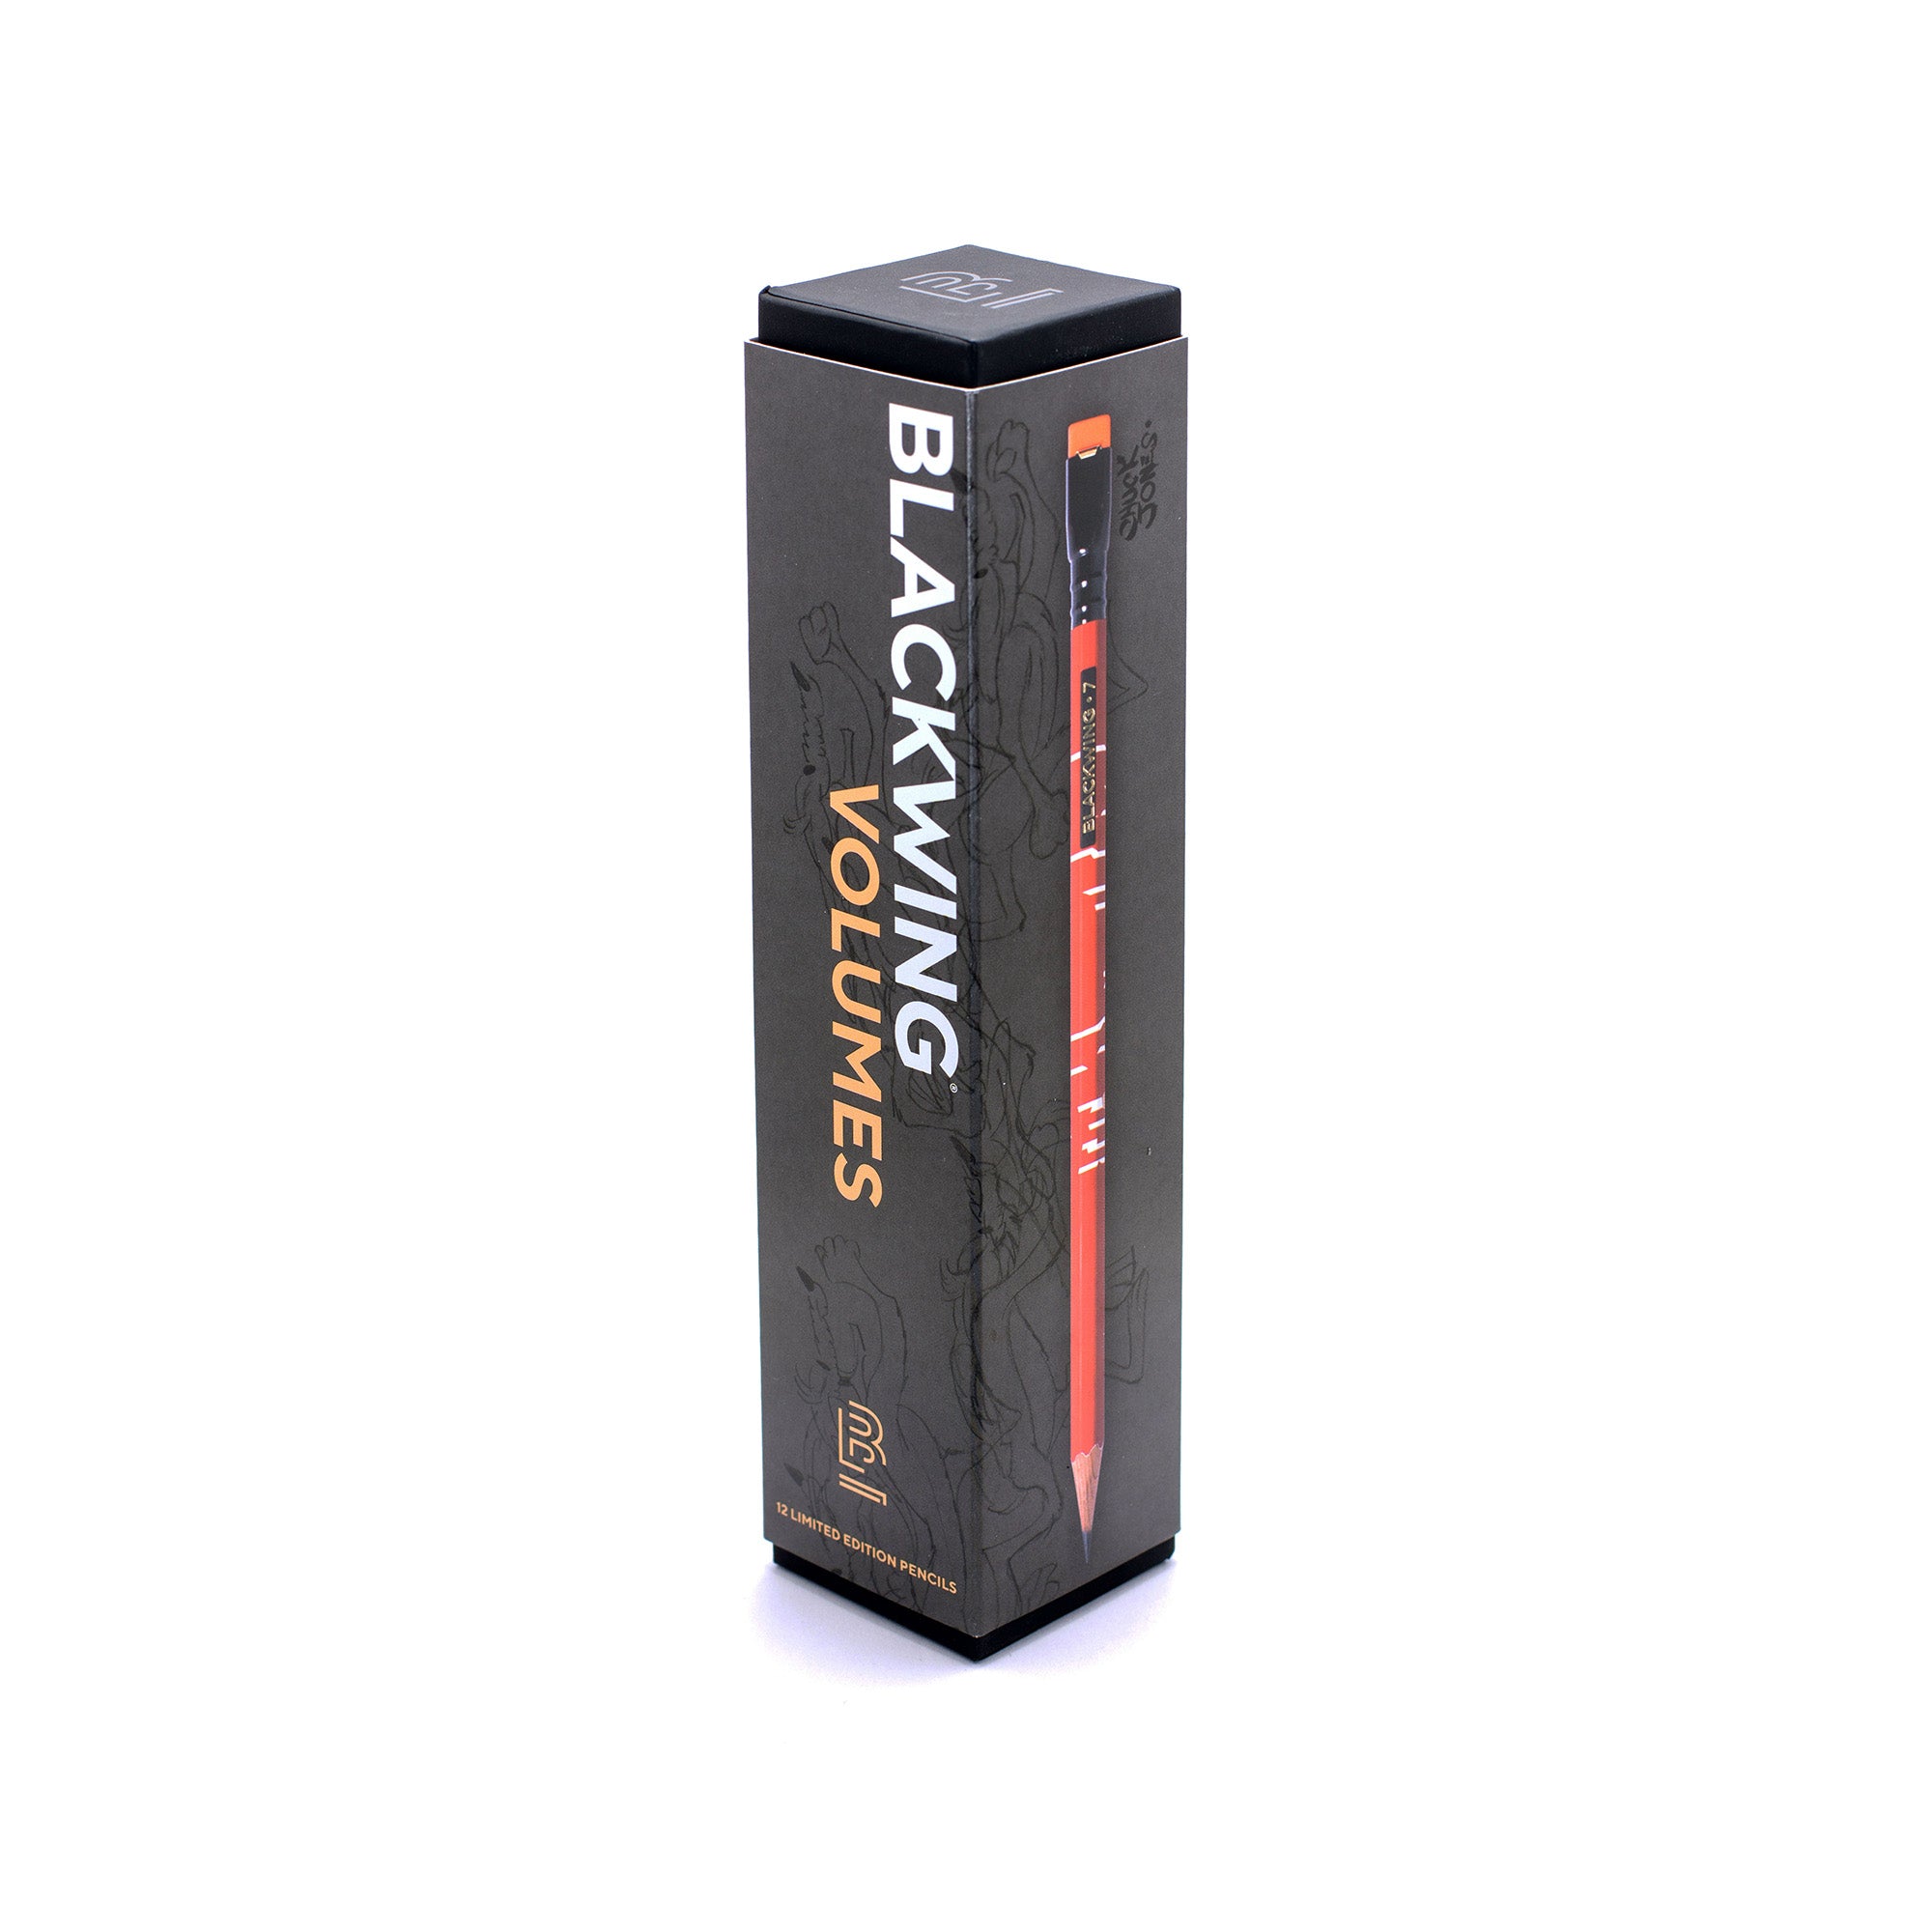 A Blackwing Volume 7 (Set of 12) pencil in its box on a white background.